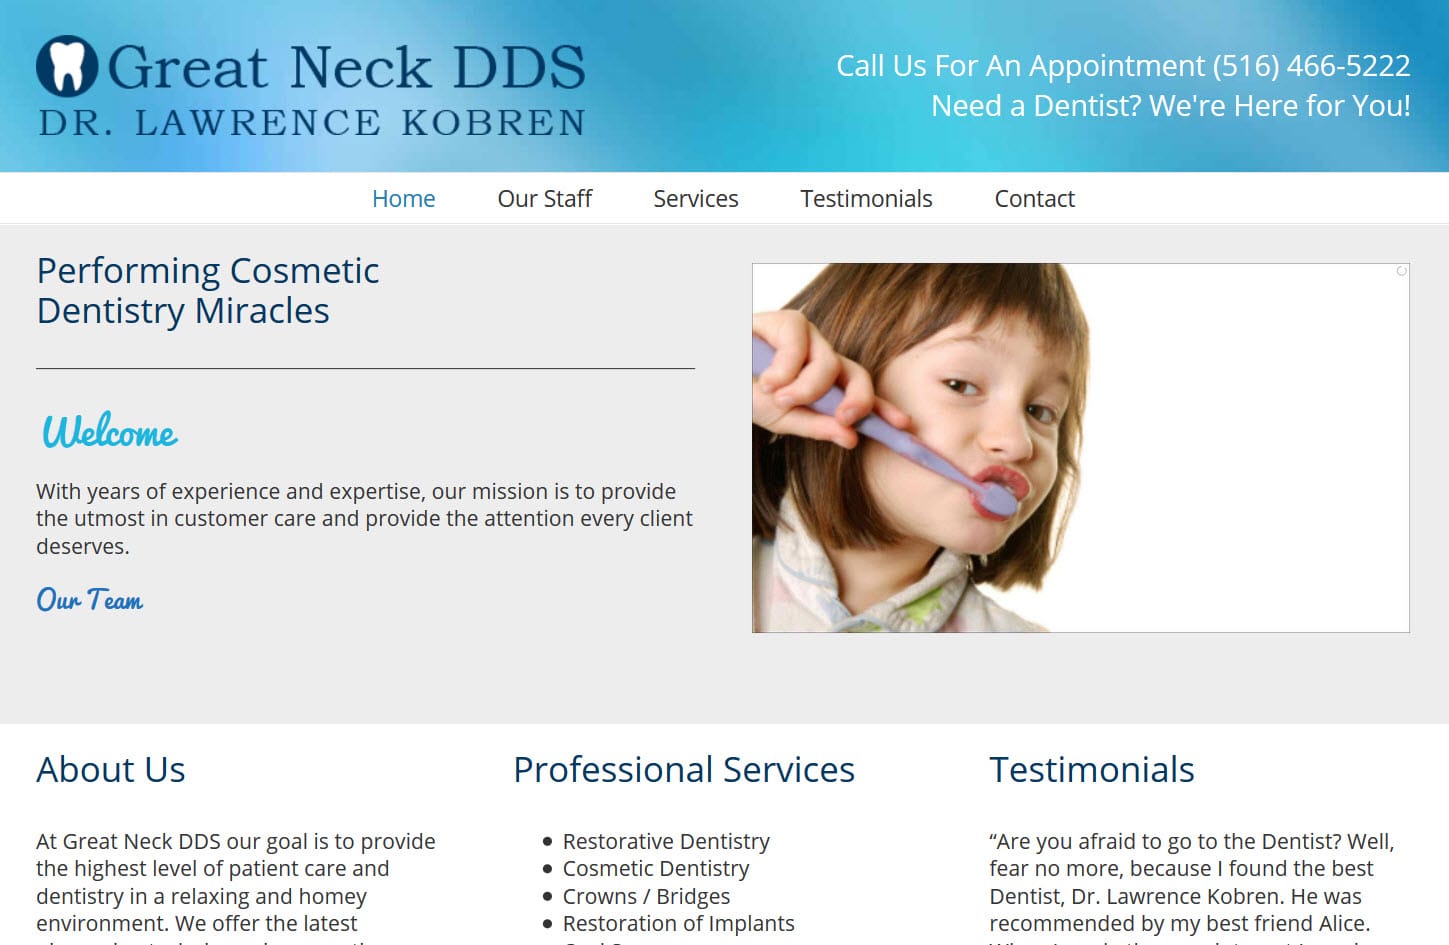 Great Neck DDS